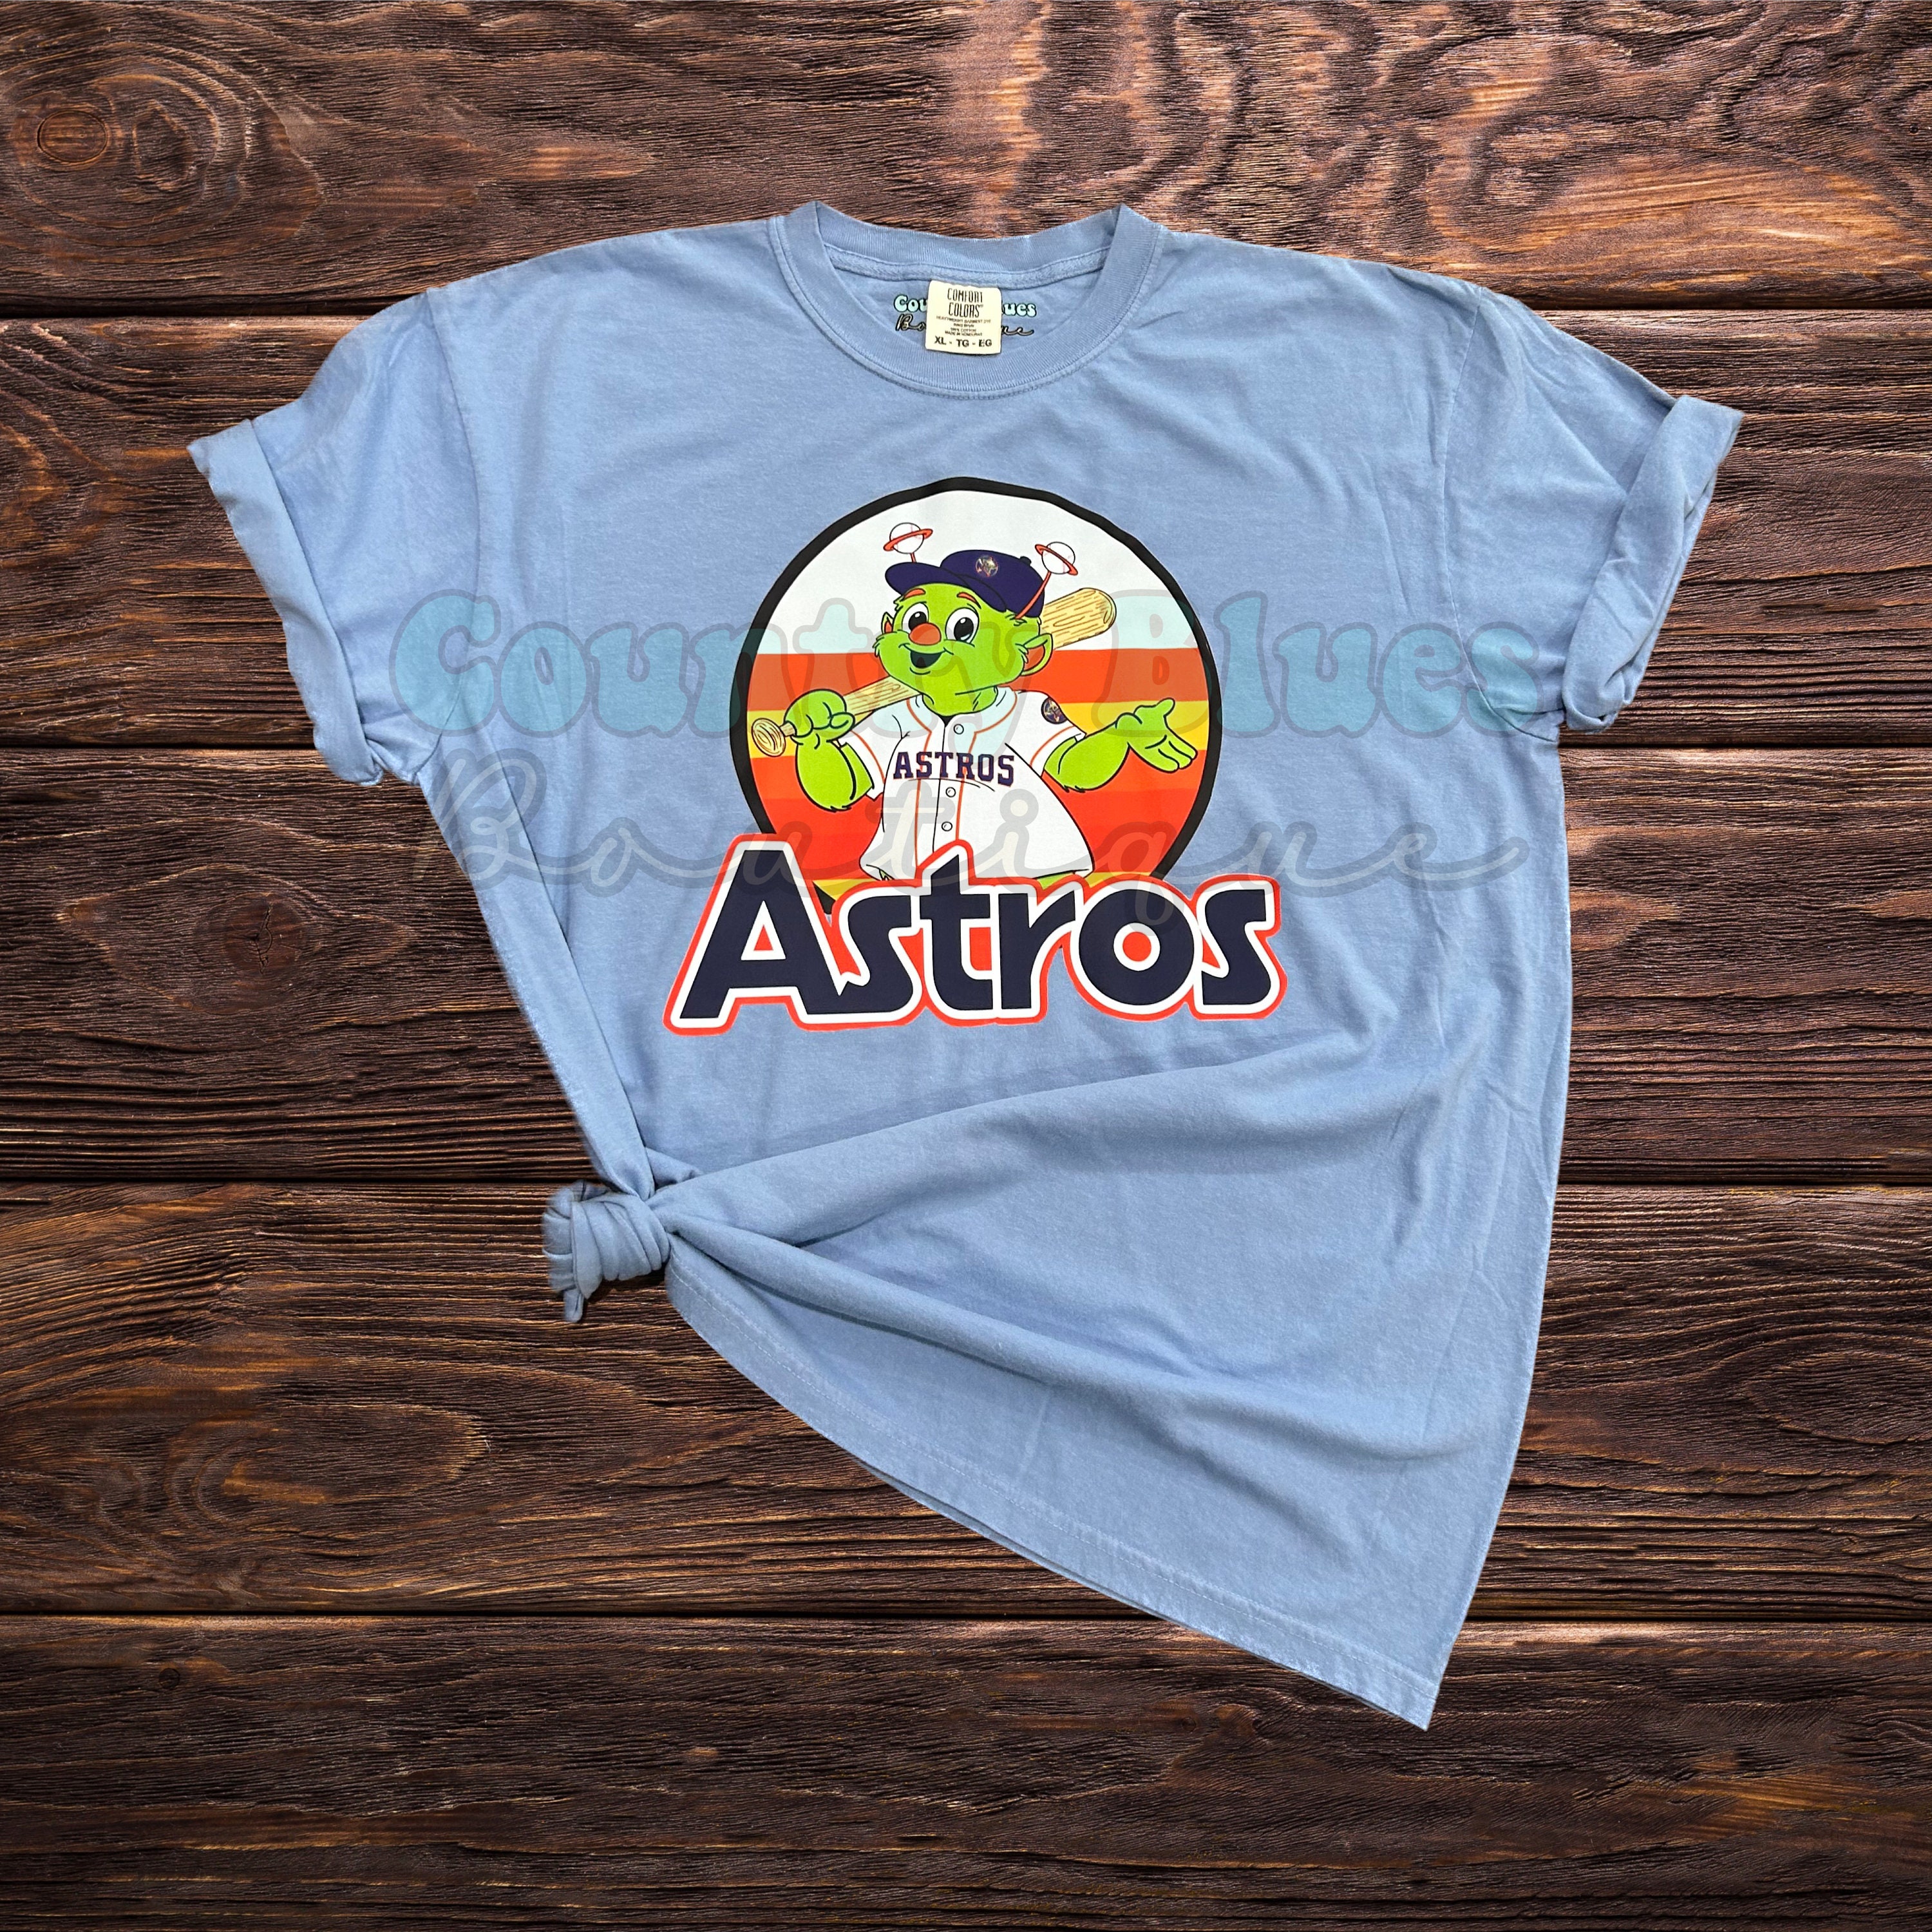 Astros Shirt Orbit Mascot America 4th July Independence Day Houston Astros  Gift - Personalized Gifts: Family, Sports, Occasions, Trending 